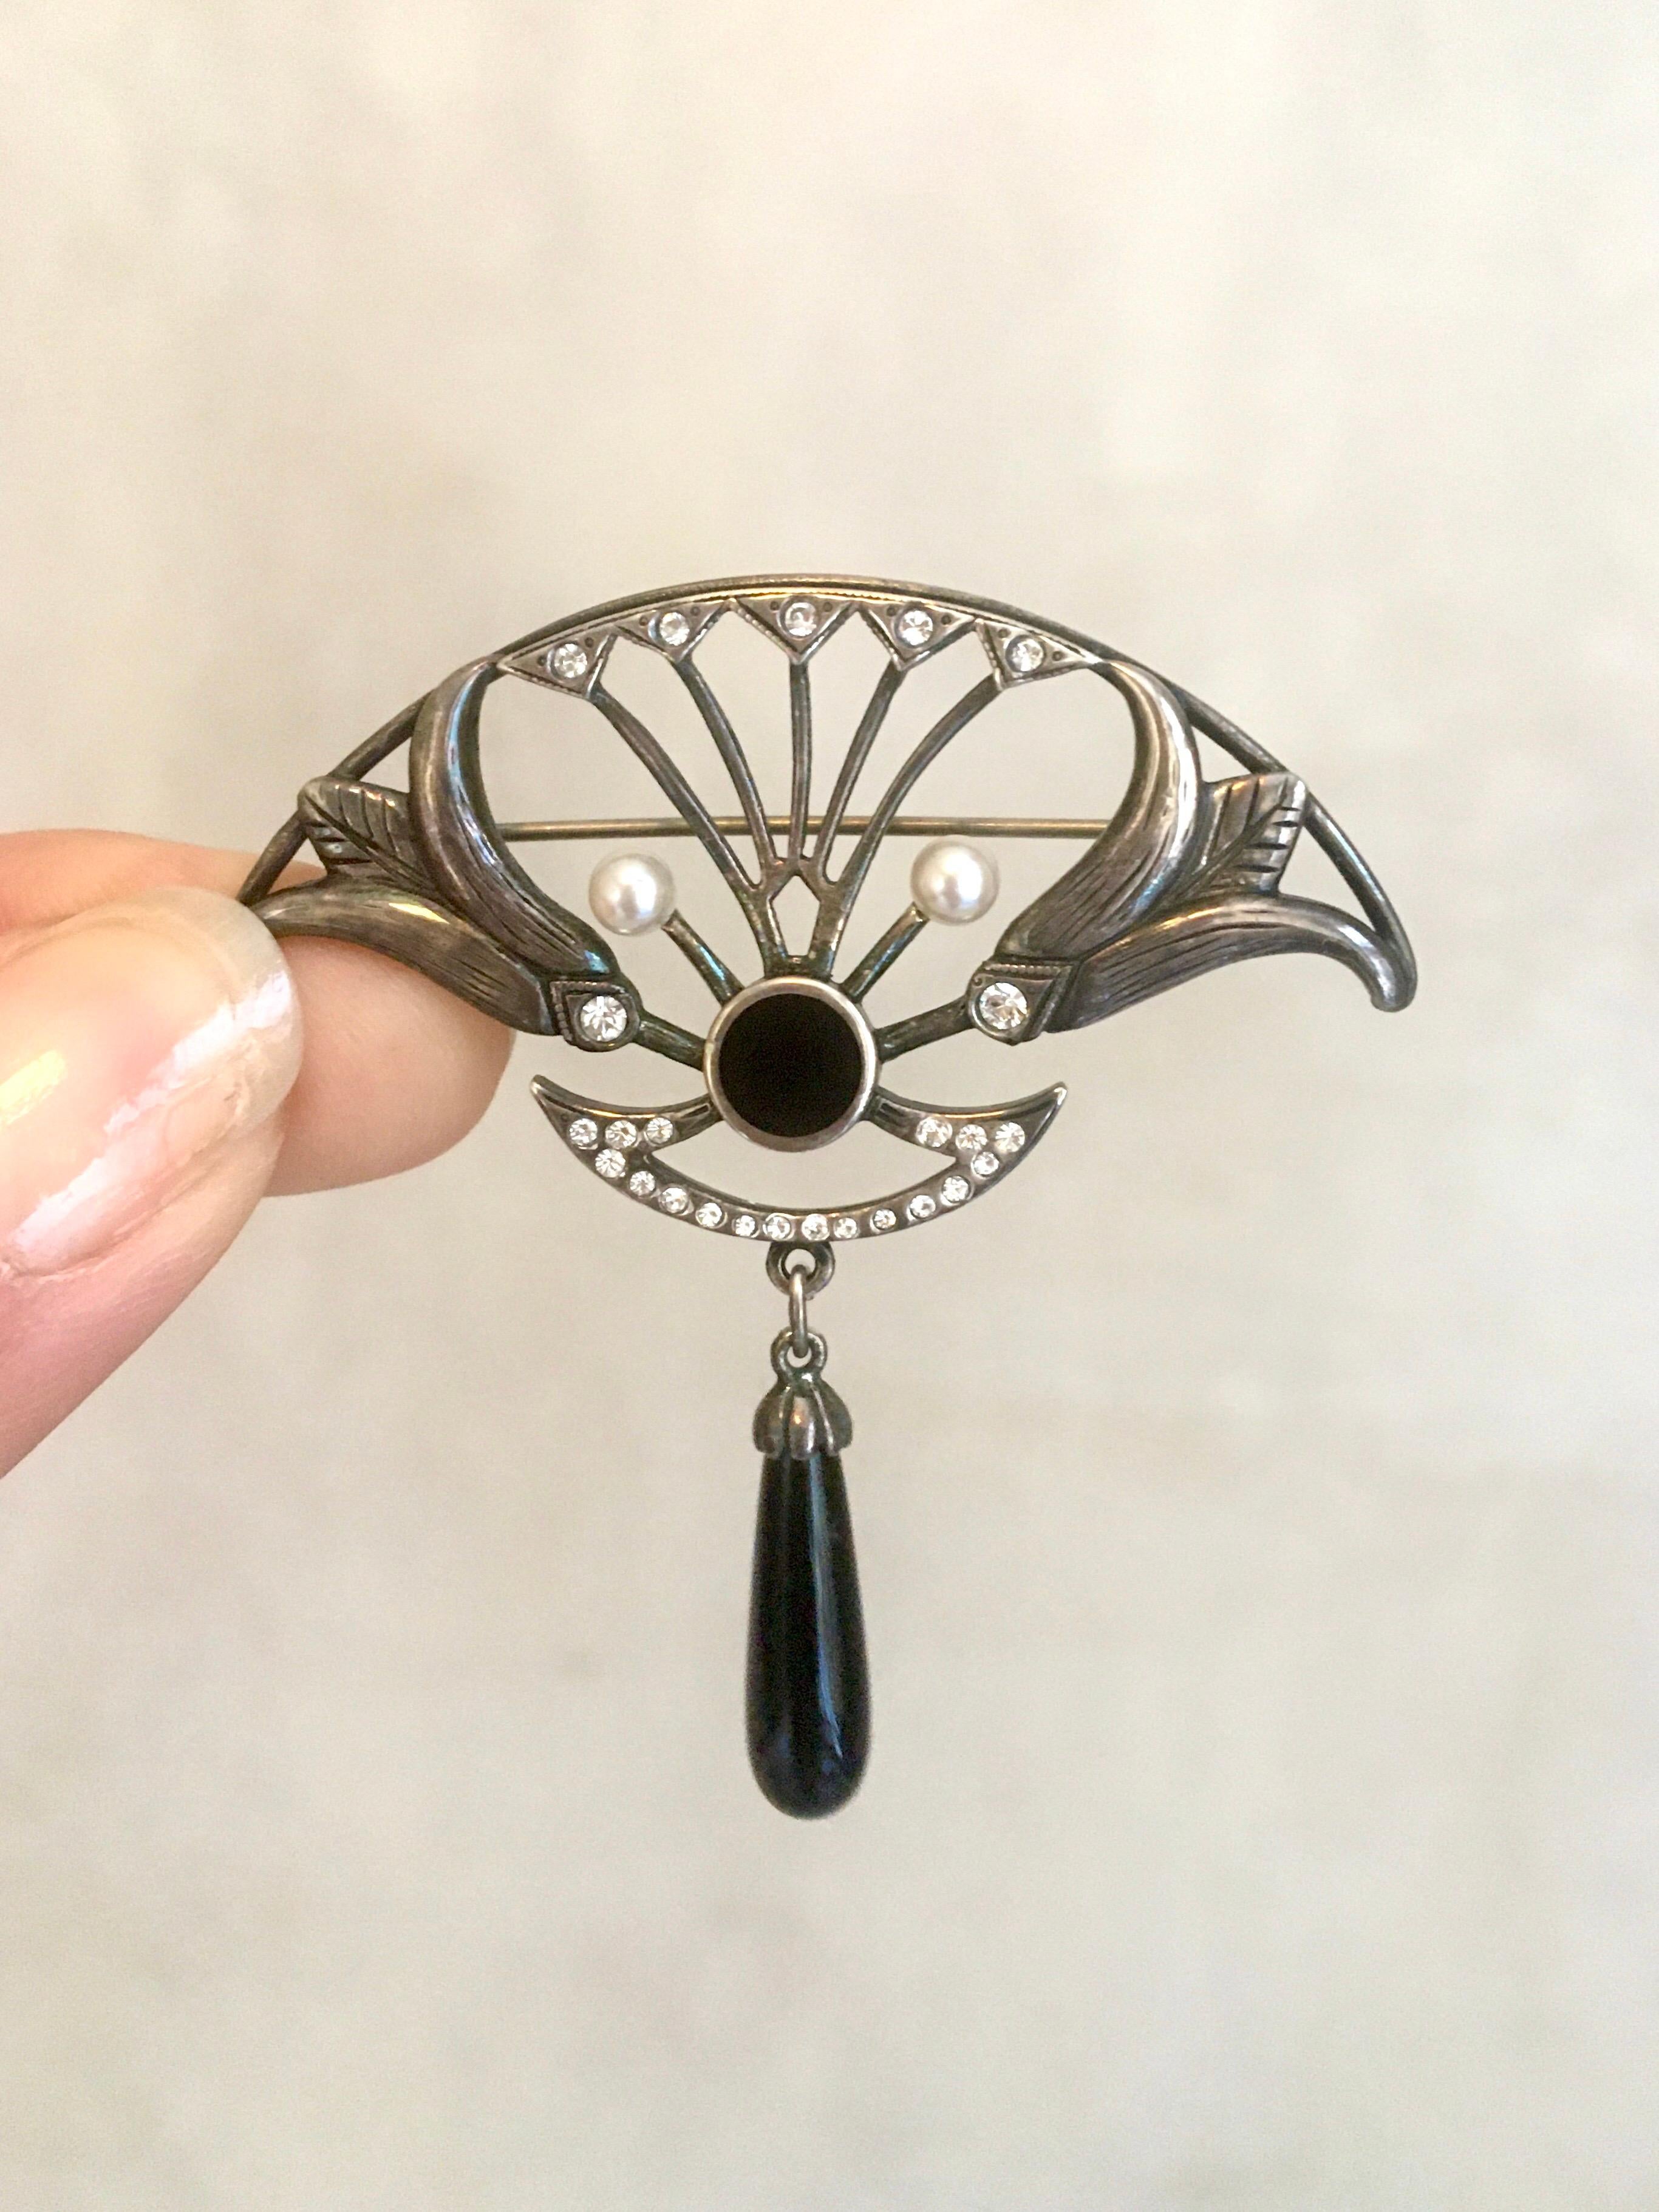 An Art Deco sterling silver brooch set with black onyx and pearls. The silver openwork top is set with shimmering rows of crystal diamonds and two white cultured pearls. The silver has carved flower accents, which provides a wonderful texture to the